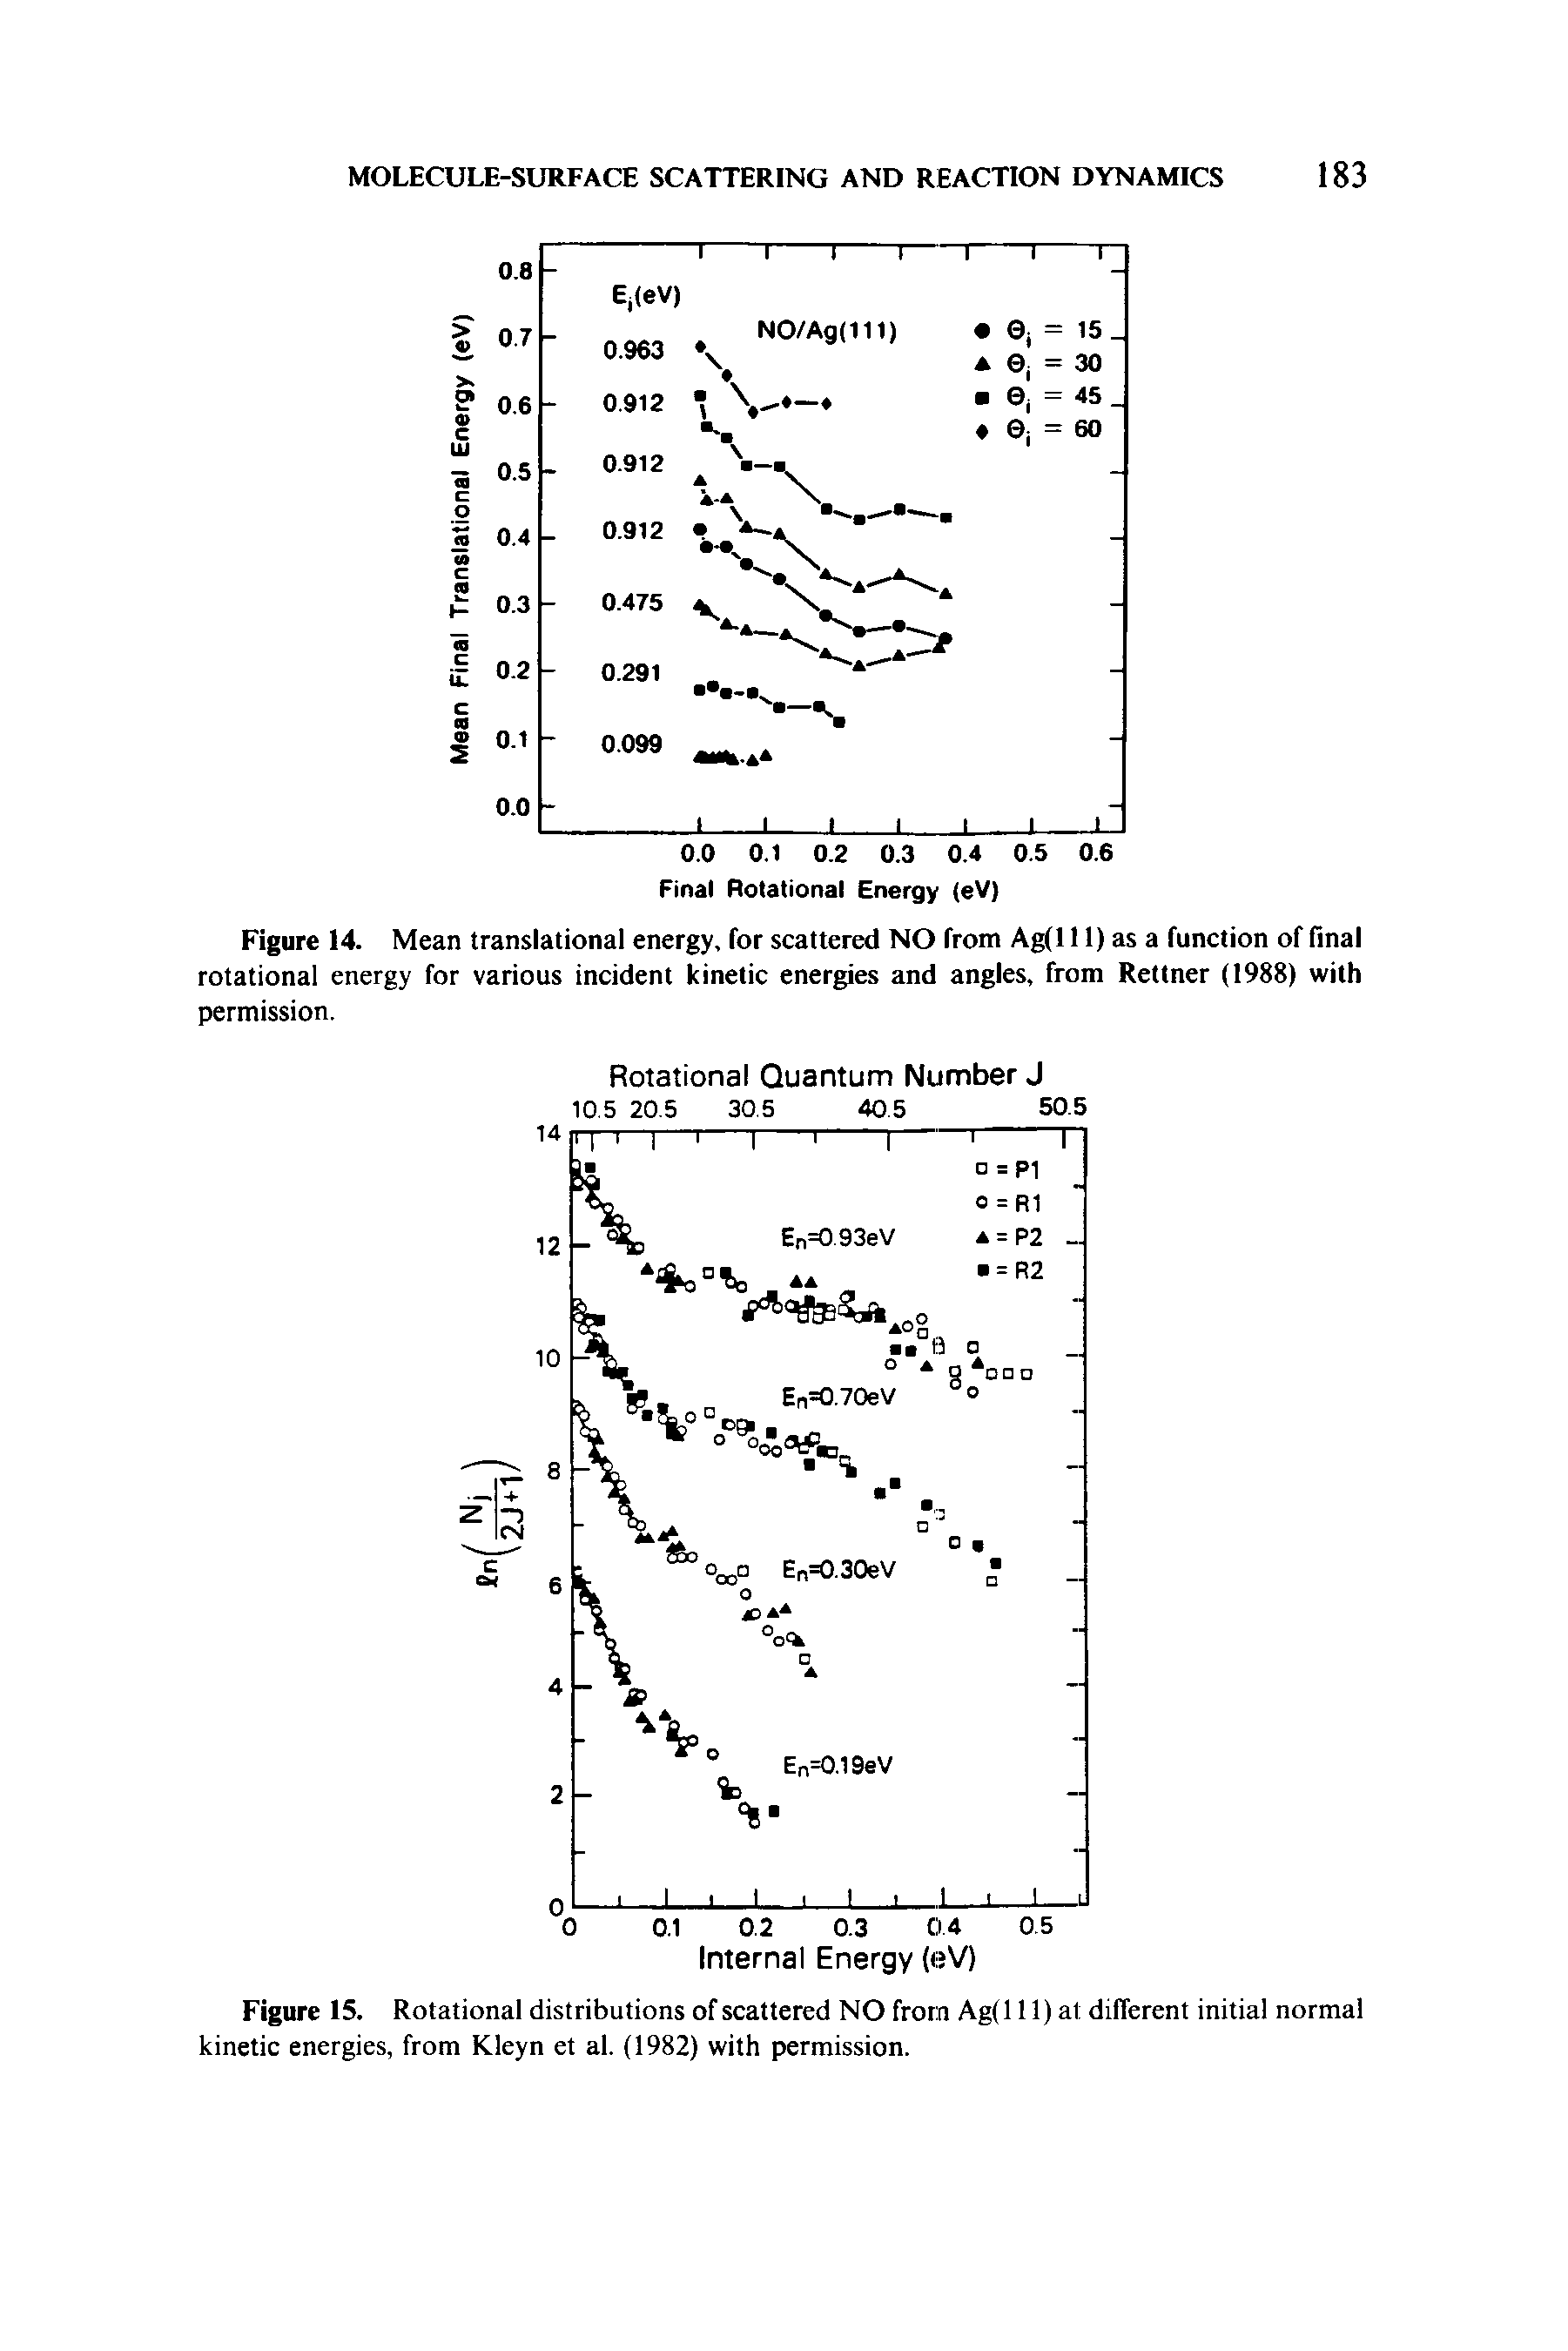 Figure 14. Mean translational energy, for scattered NO from Ag(l 11) as a function of finai rotational energy for various incident kinetic energies and angies, from Rettner (1988) with permission.